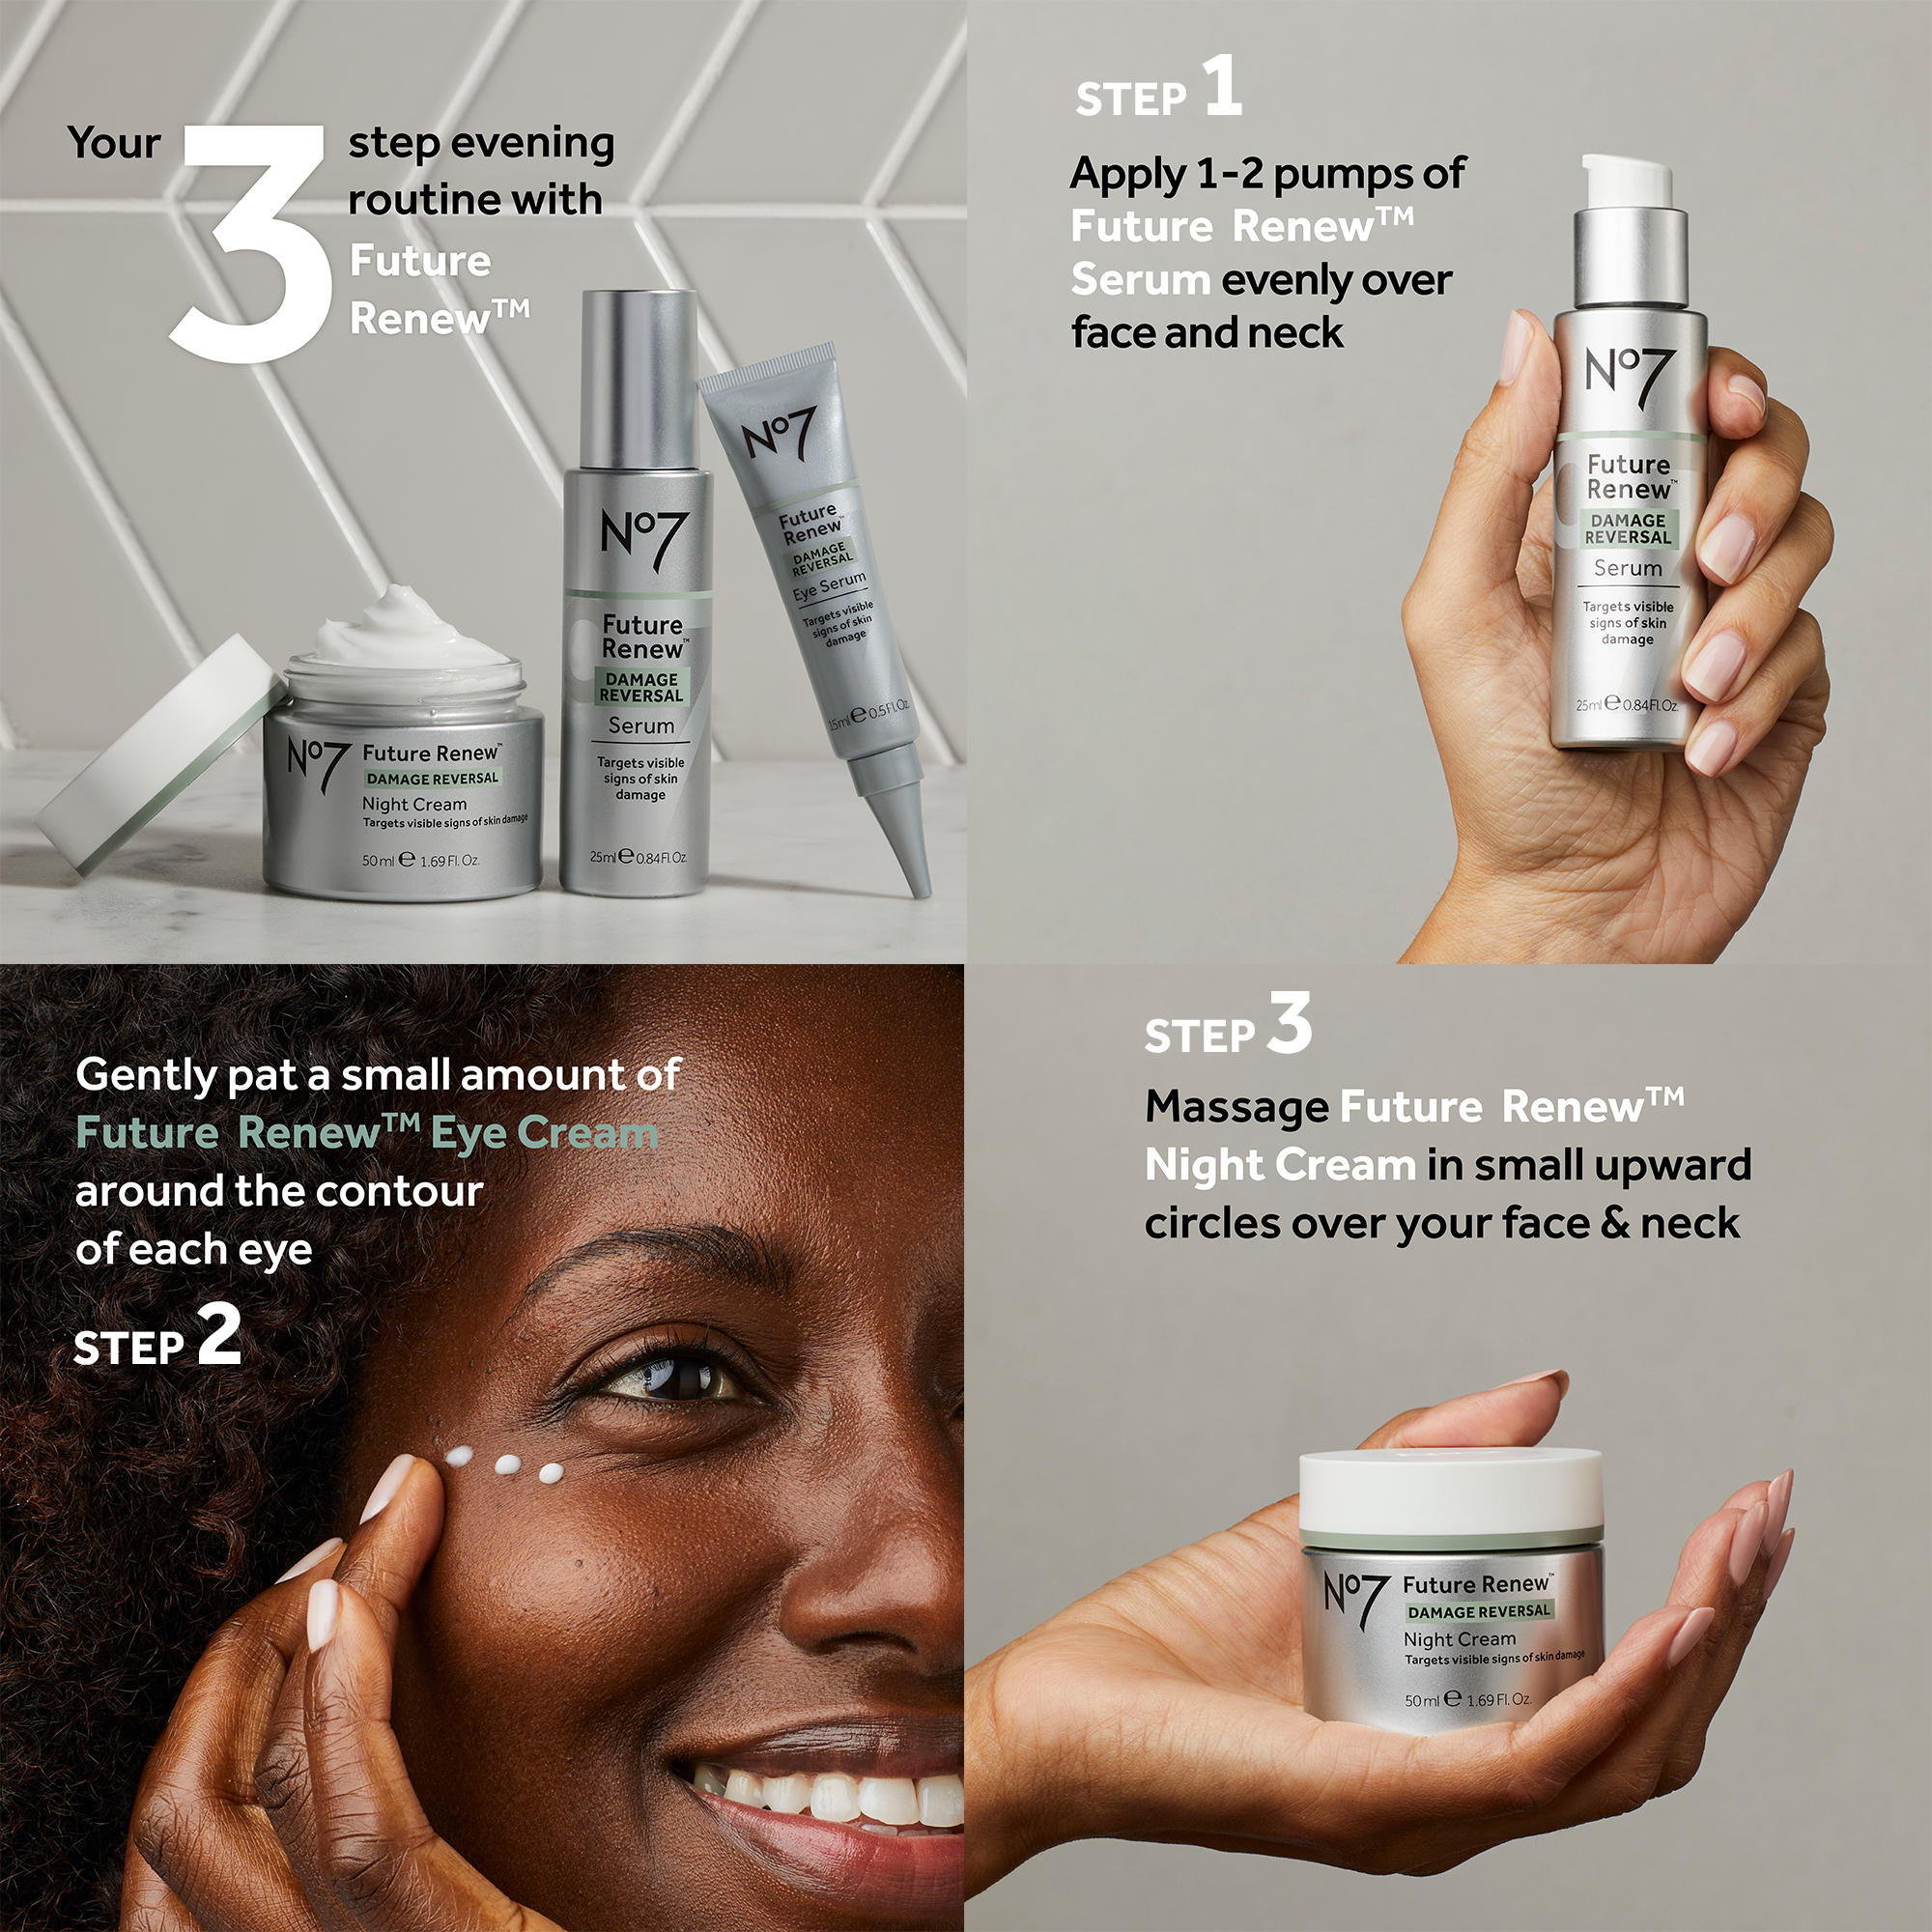 your 3 step evening routine with future renew. Step 1, apply 1-2 pumps of future renew serum evenly over face and neck. Step 2, gently pat a small amount of future renew eve cream around the contour of each eye. Step 3 massae future renew night cream in small upward circles over your face and neck.